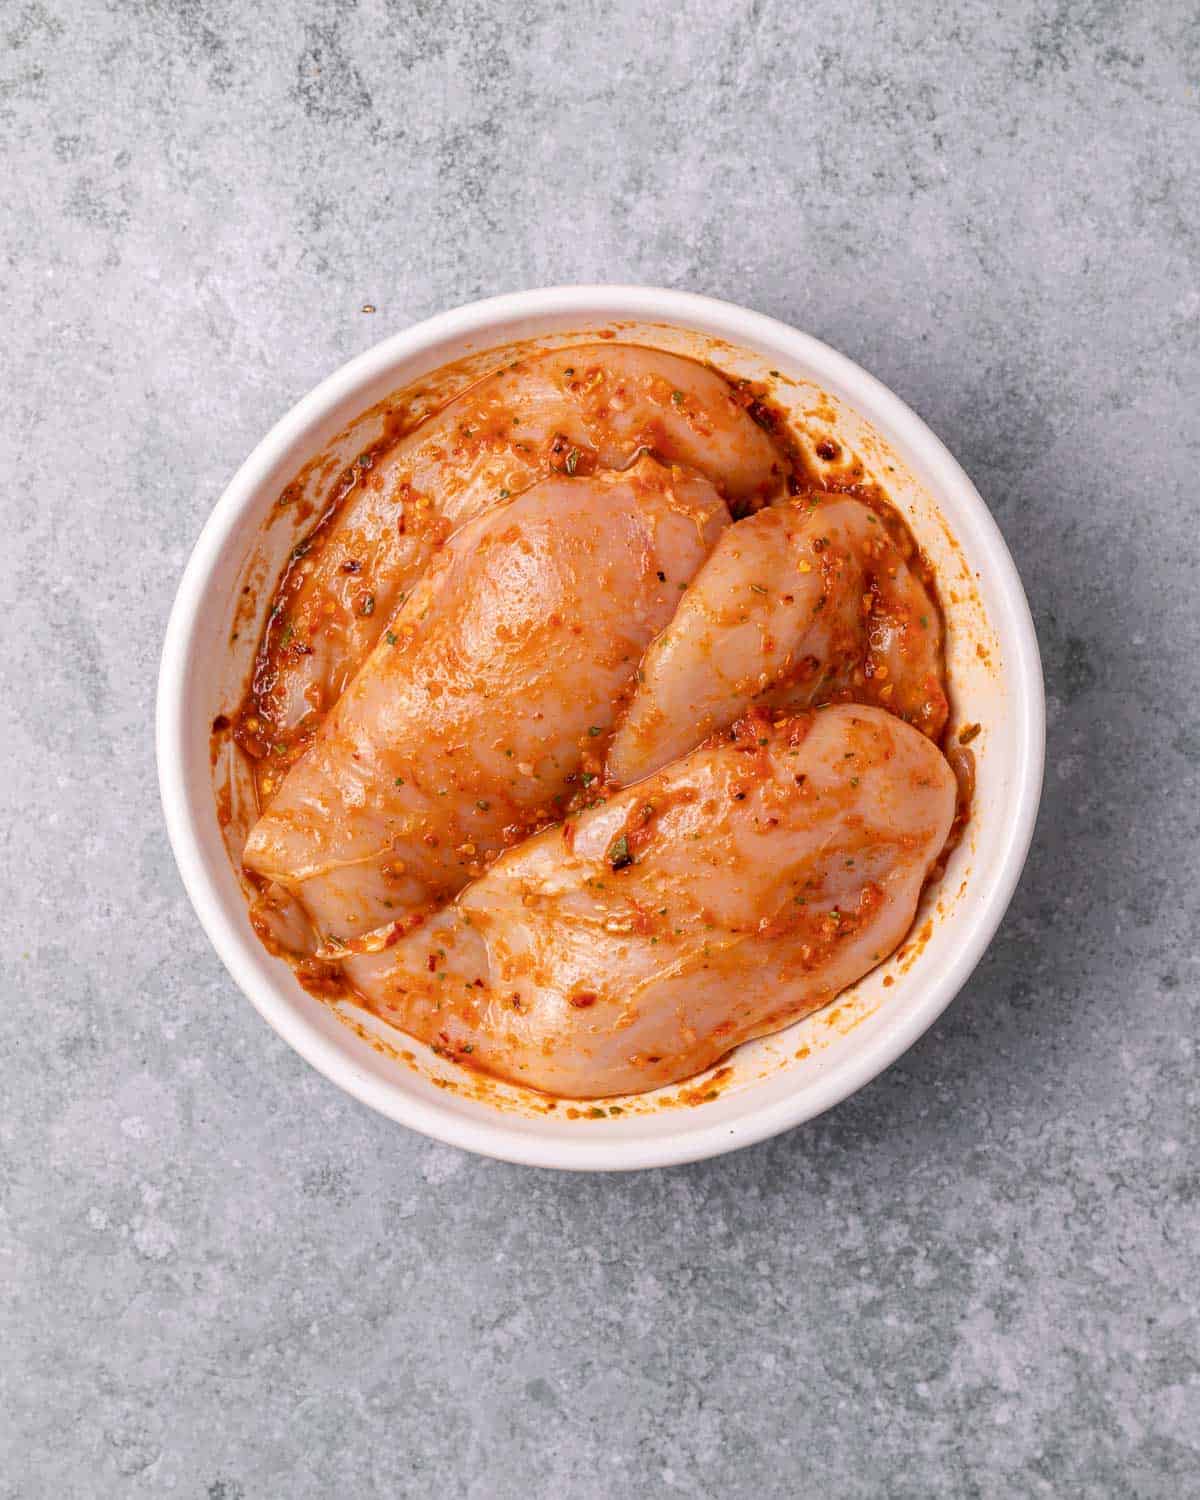 Chicken marinating in a white bowl.